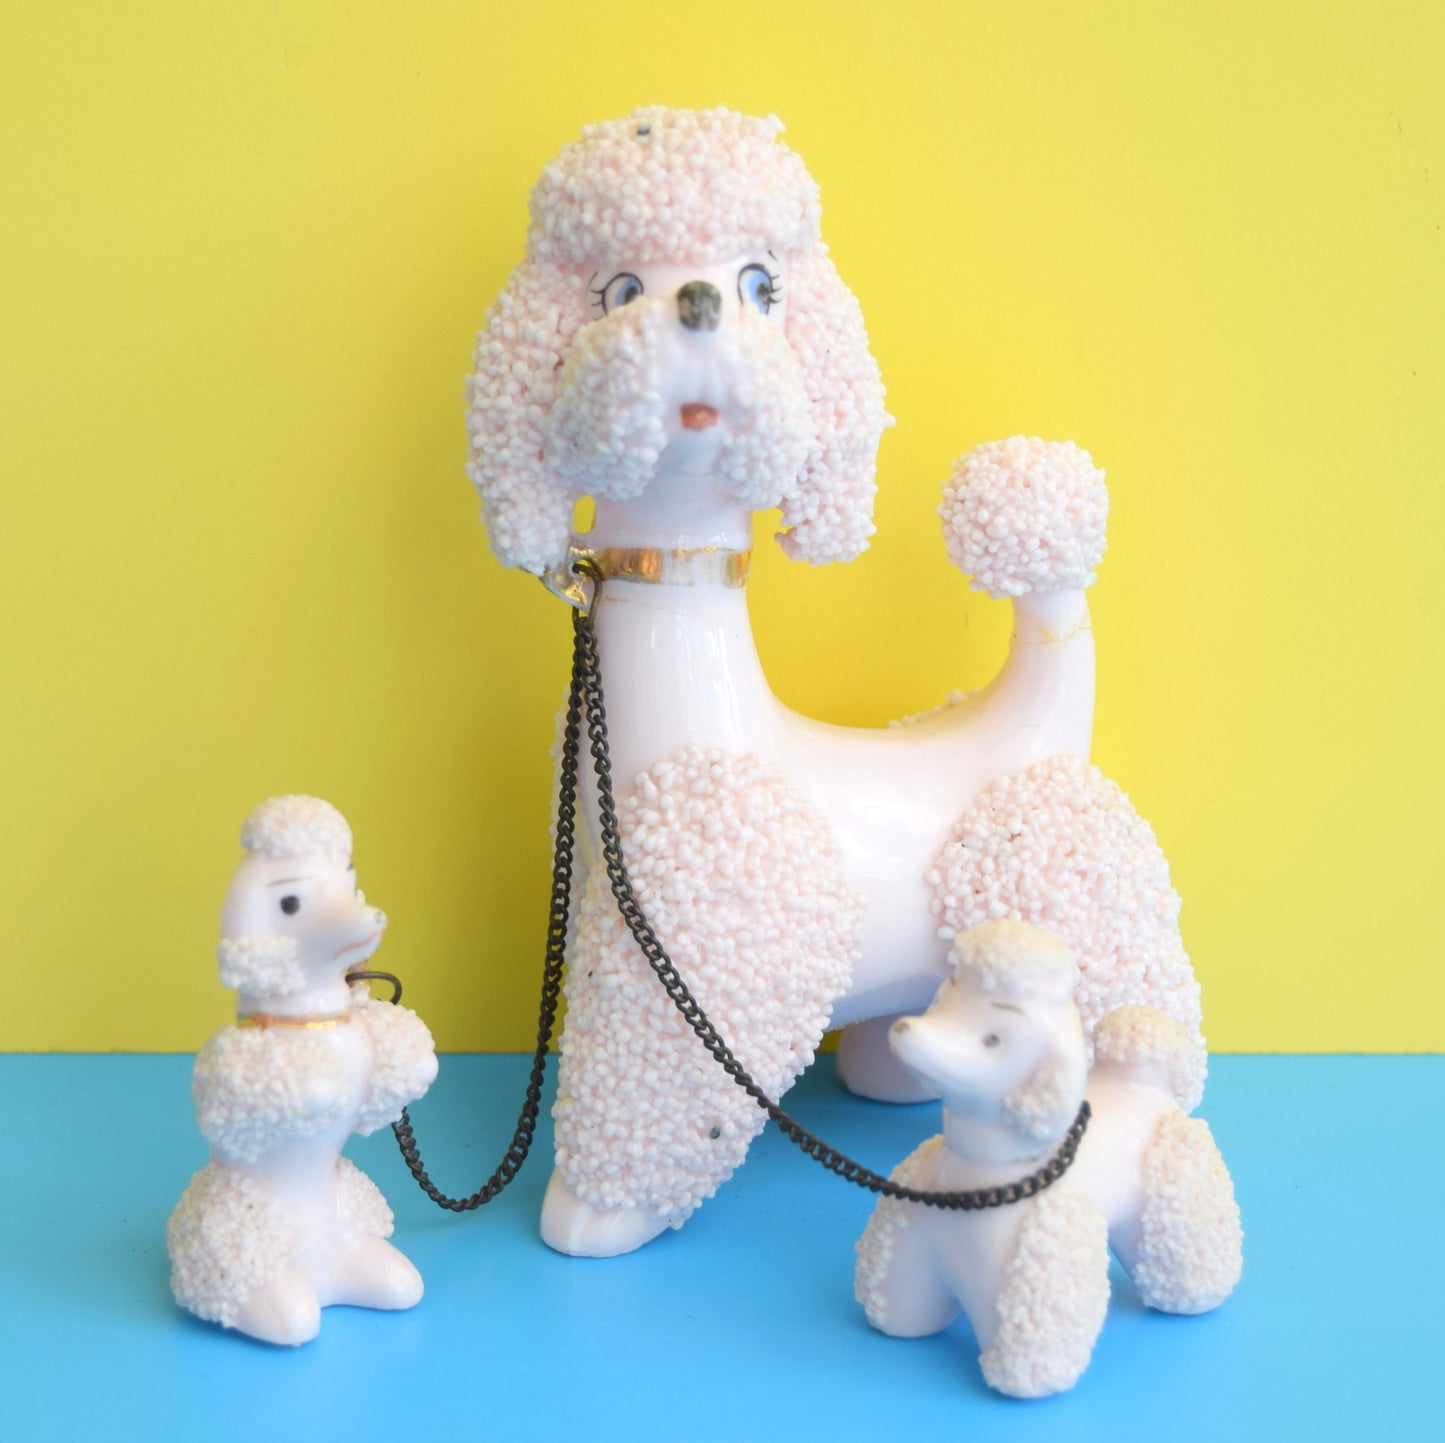 Vintage 1950s Ceramic Poodle Family With Chain - Pink